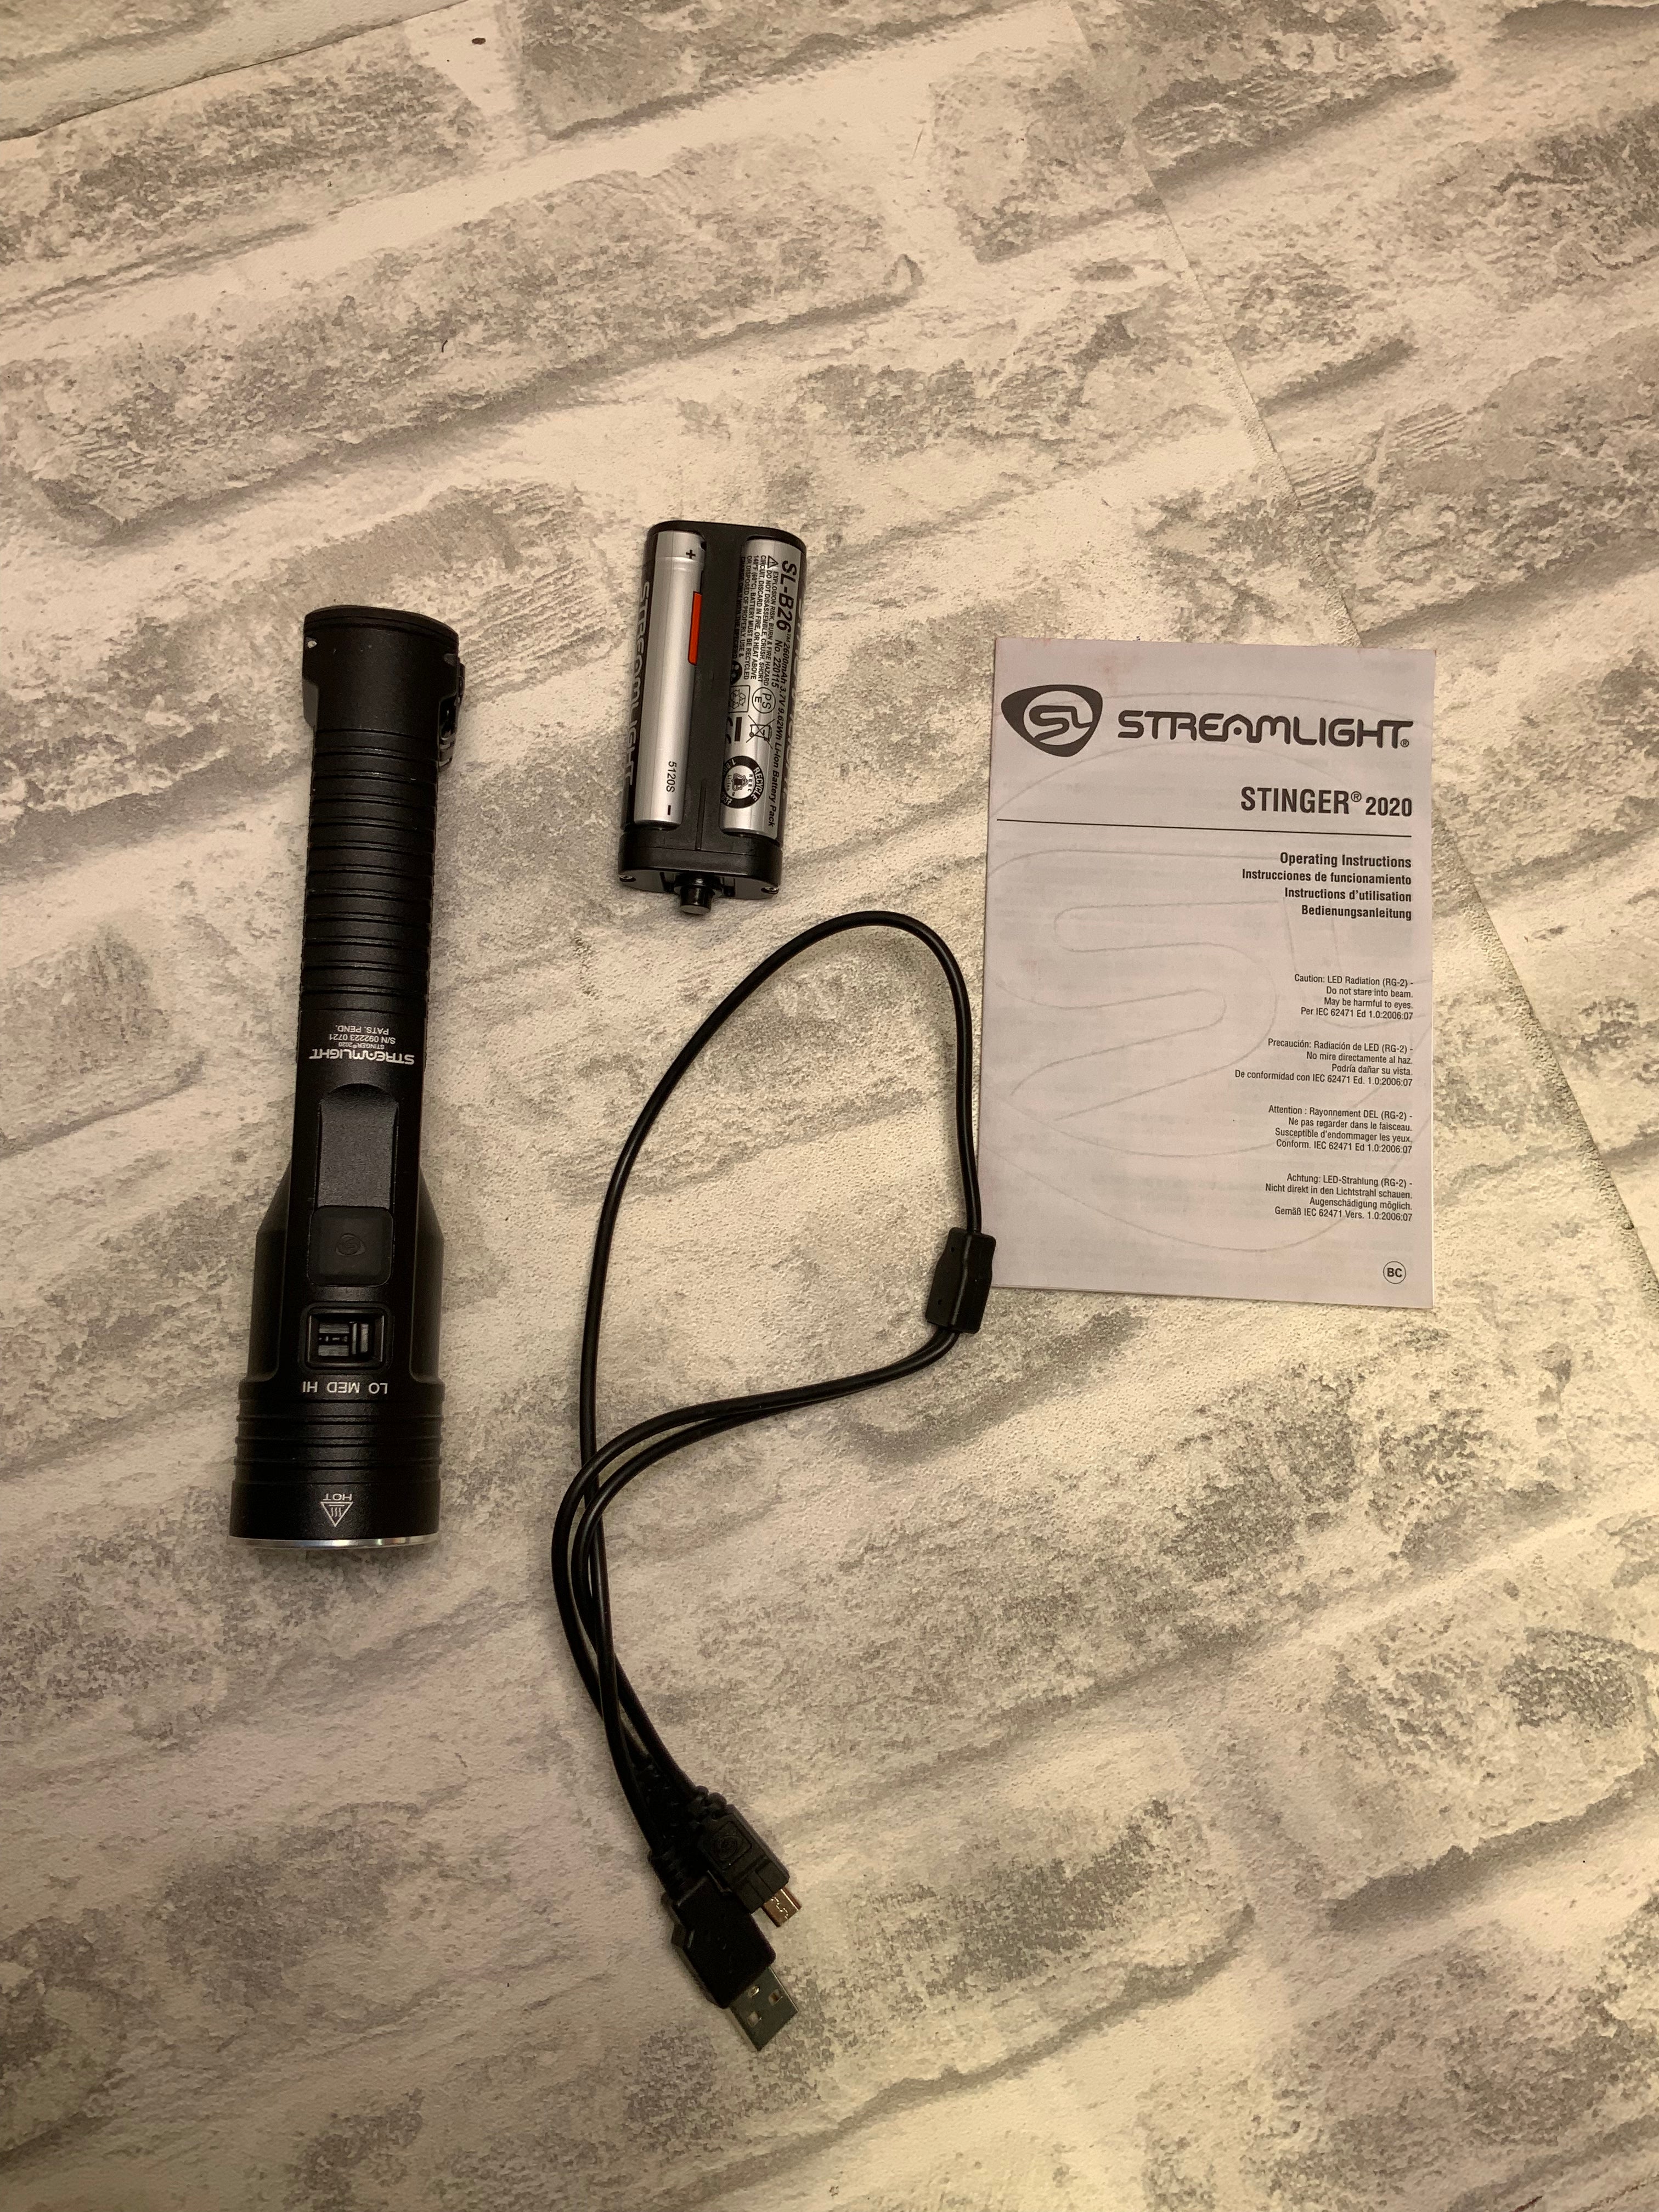 Streamlight 78100 Stinger 2020 Rechargeable Flashlight with